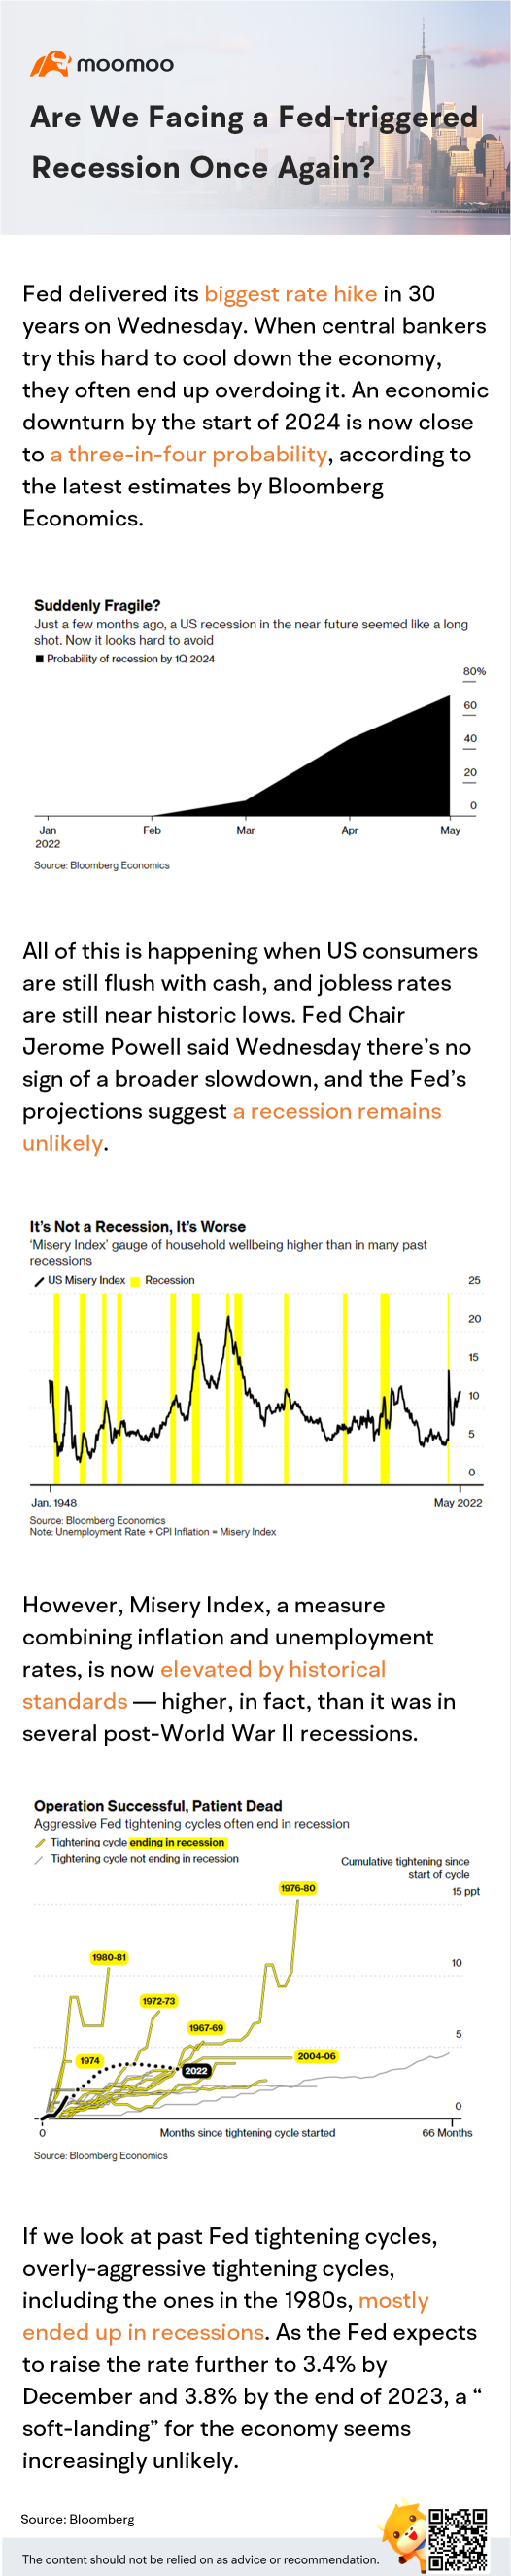 Are we facing a Fed-triggered recession once again